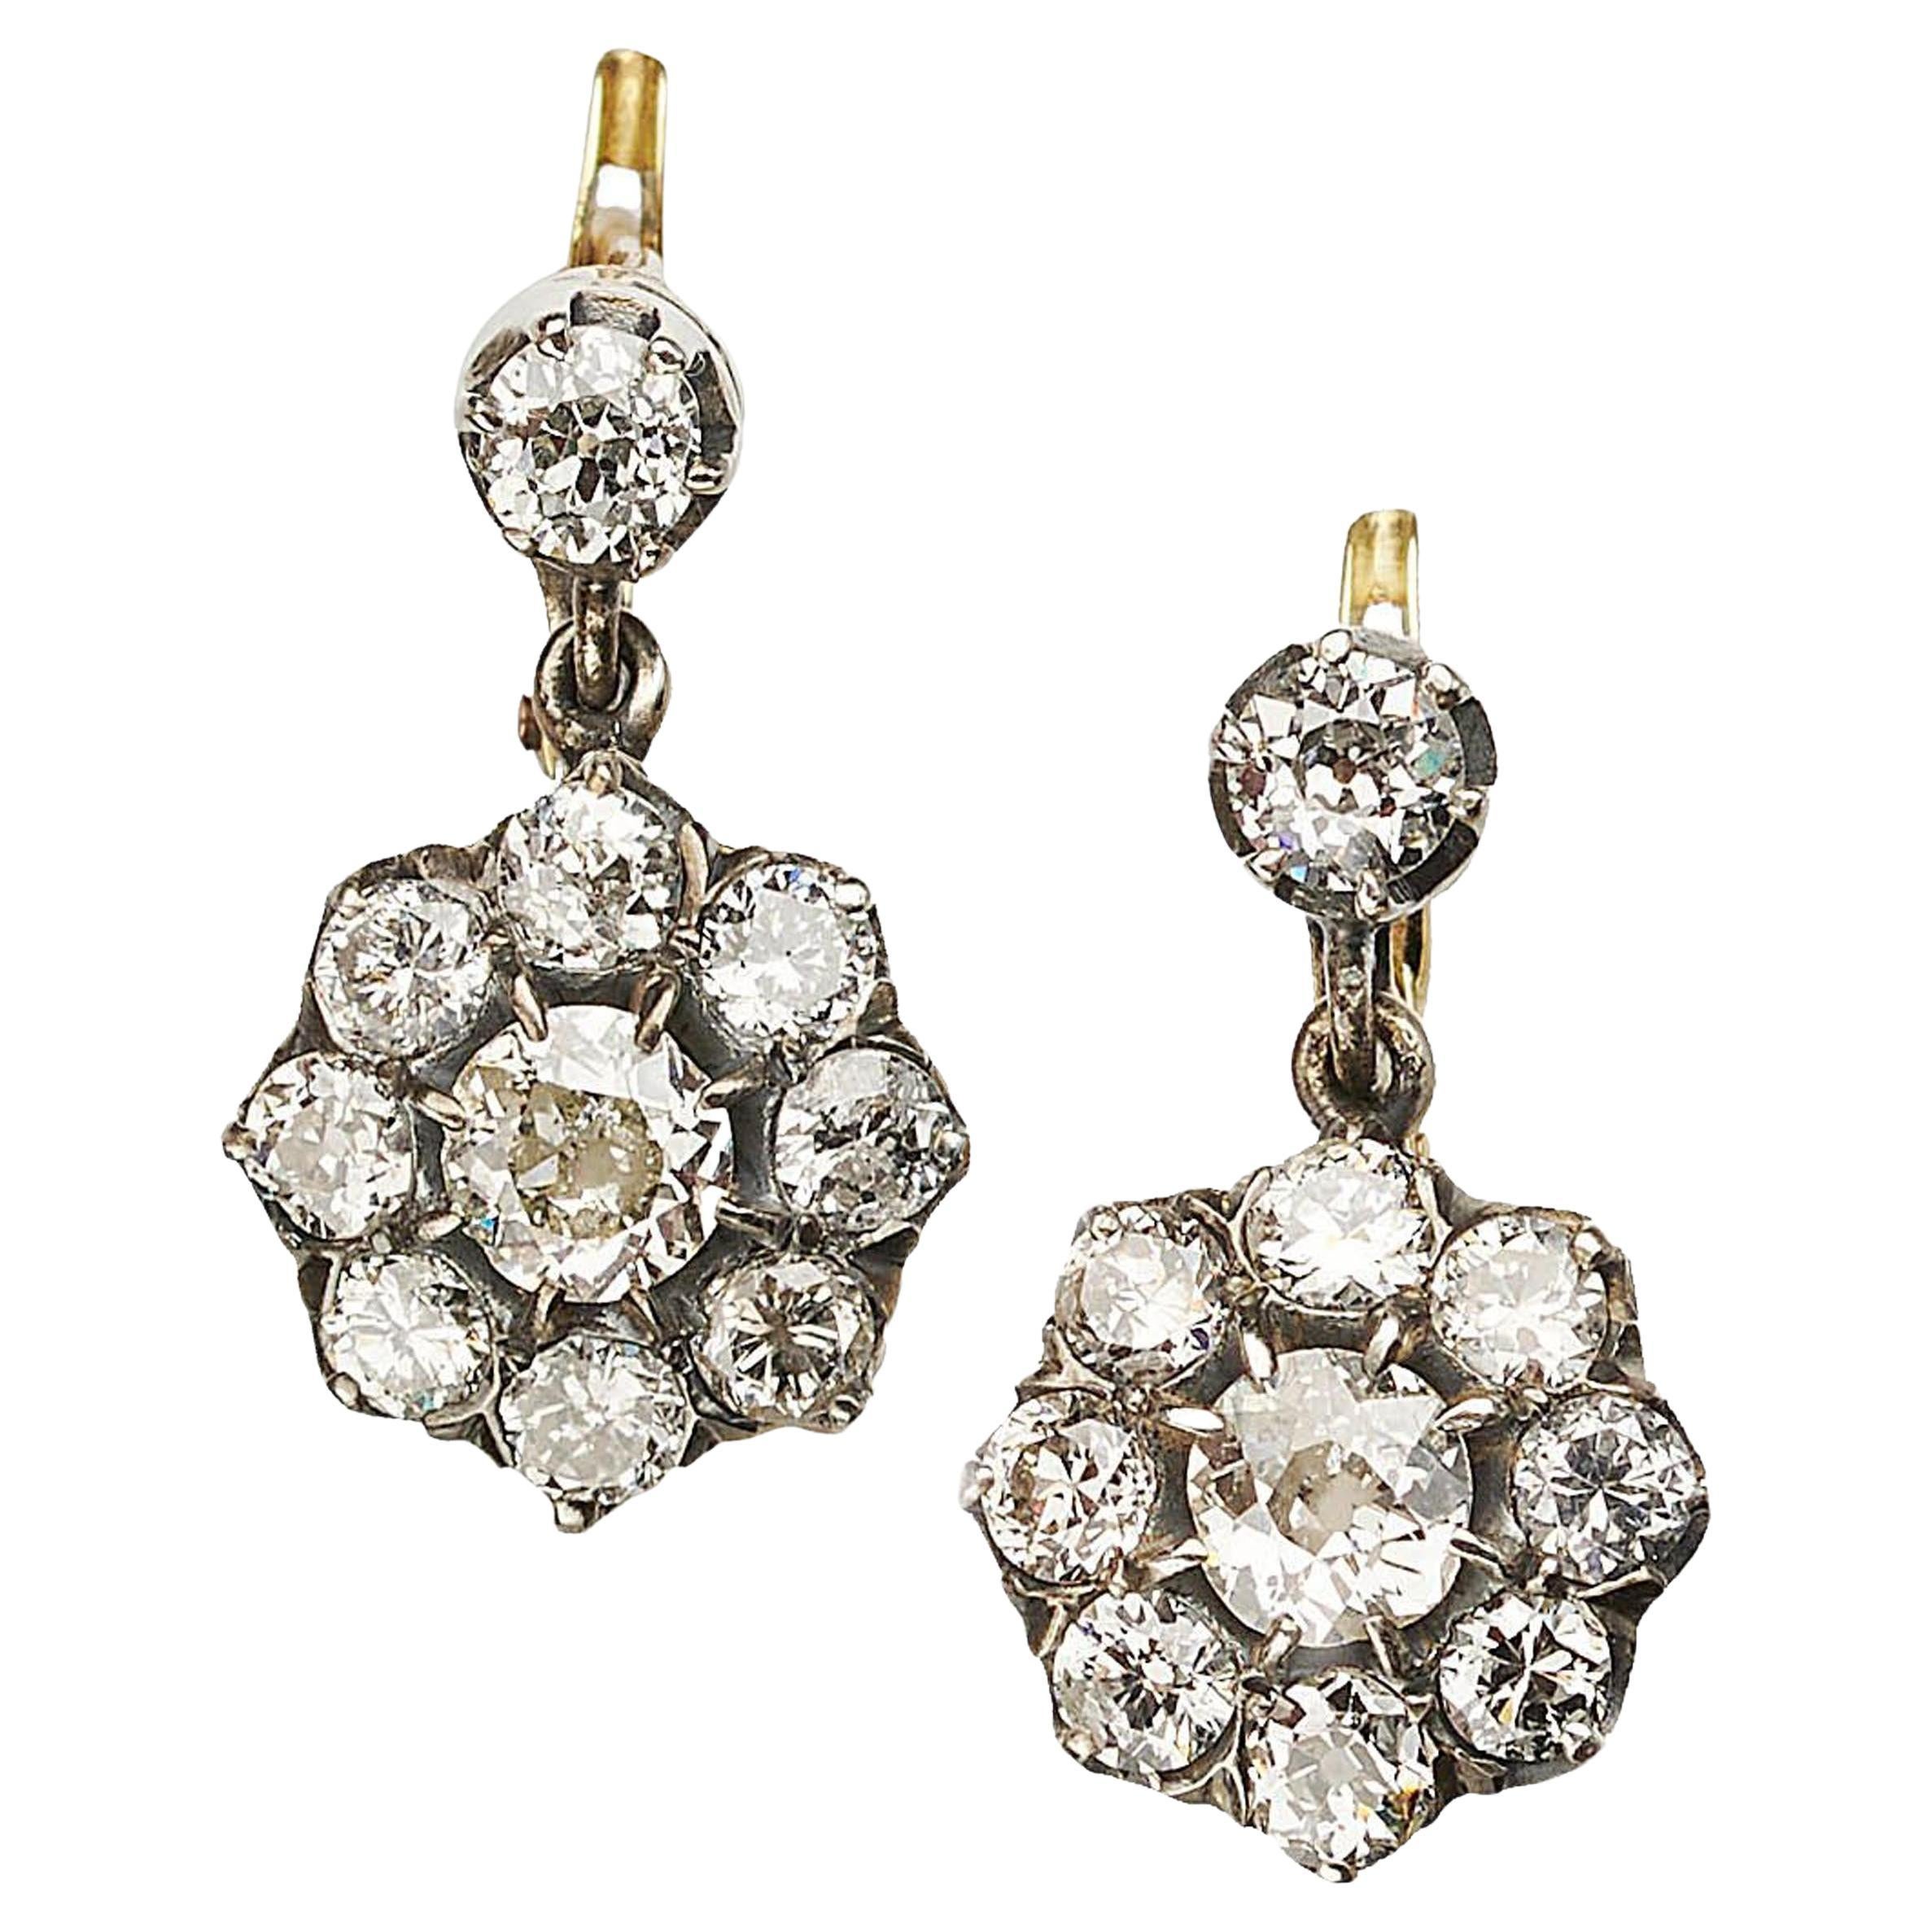 Antique Diamond and Silver Upon Gold Cluster Earrings, Circa 1920, 3.84 Carats